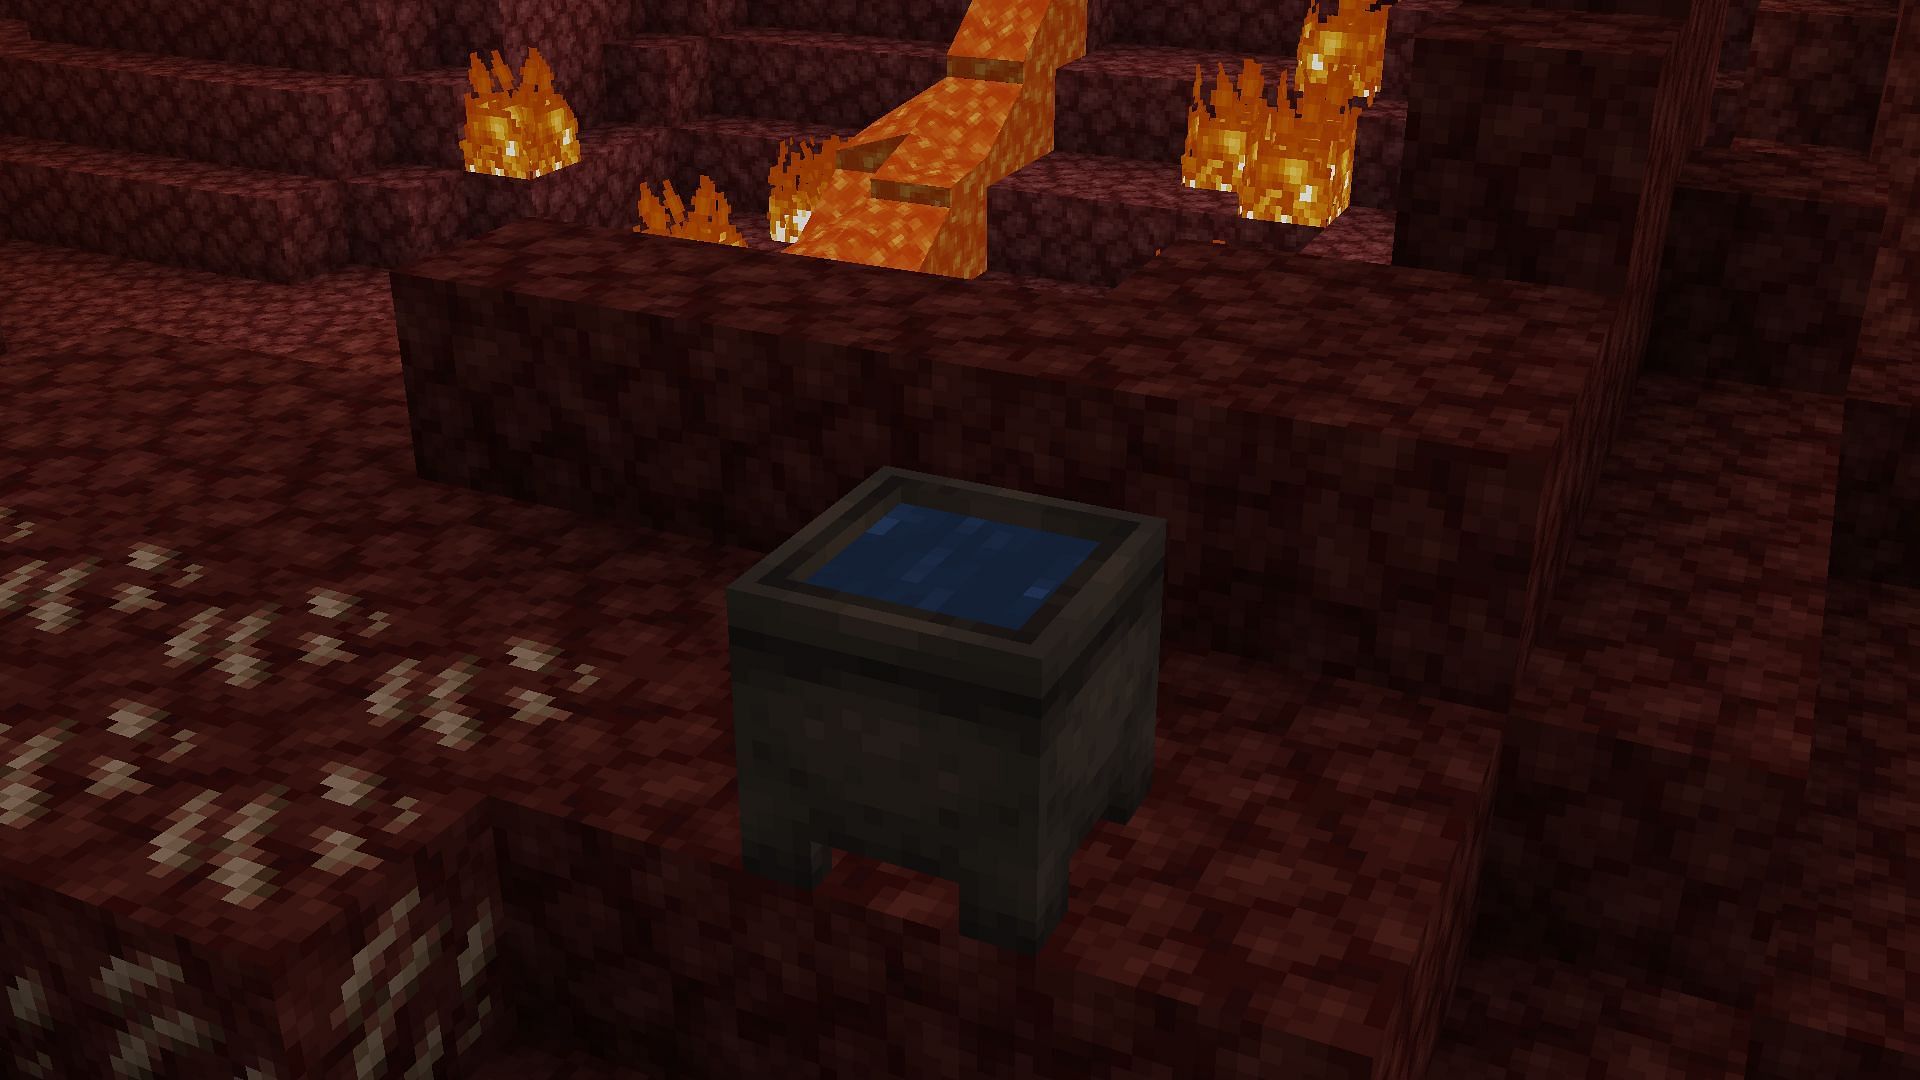 Water can exist in some shape or form in the Nether in Minecraft (Image via Mojang)